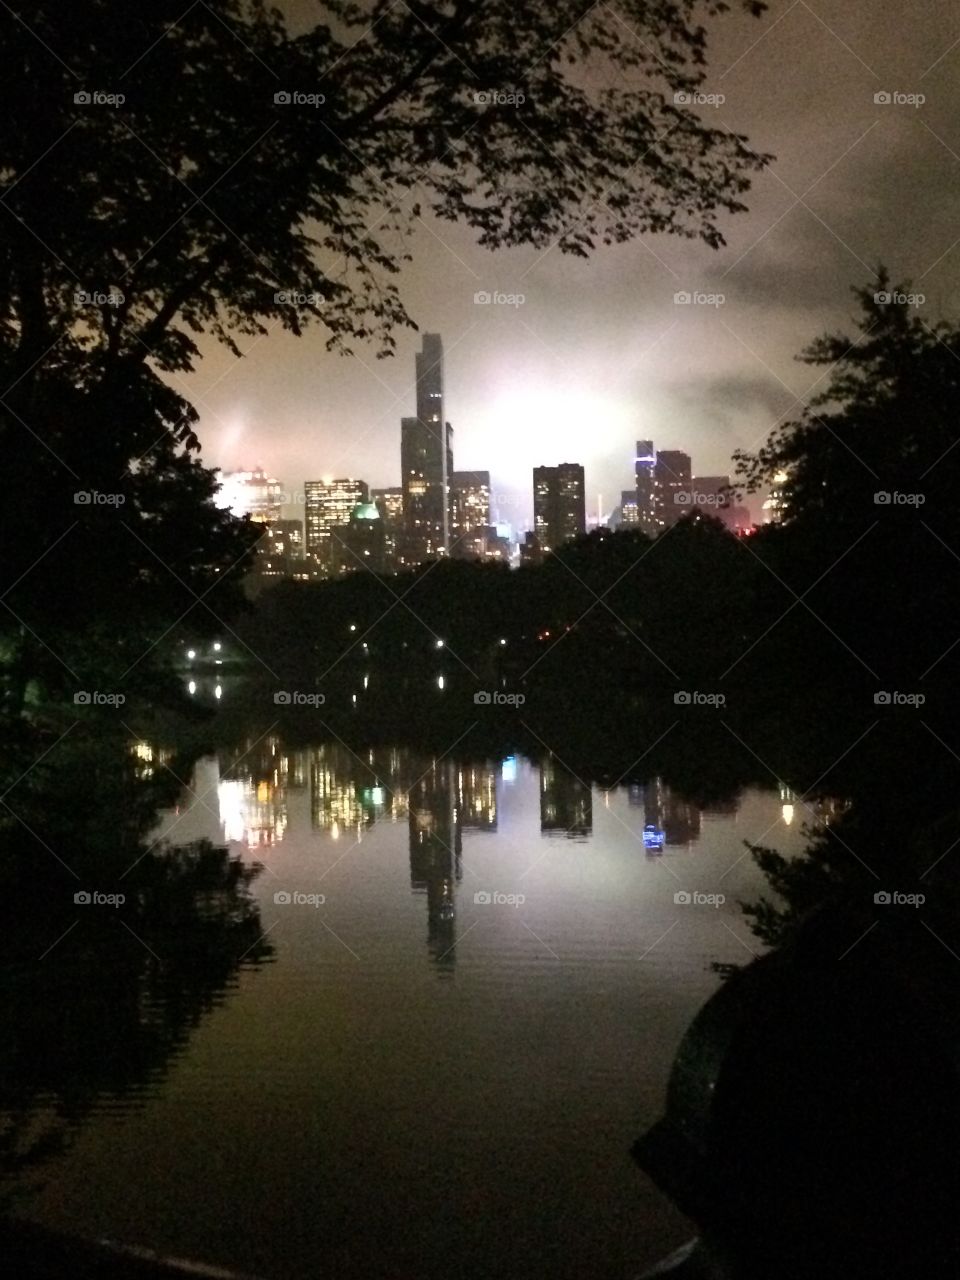 Reflection on a lake of Nyc through Central Park at night 